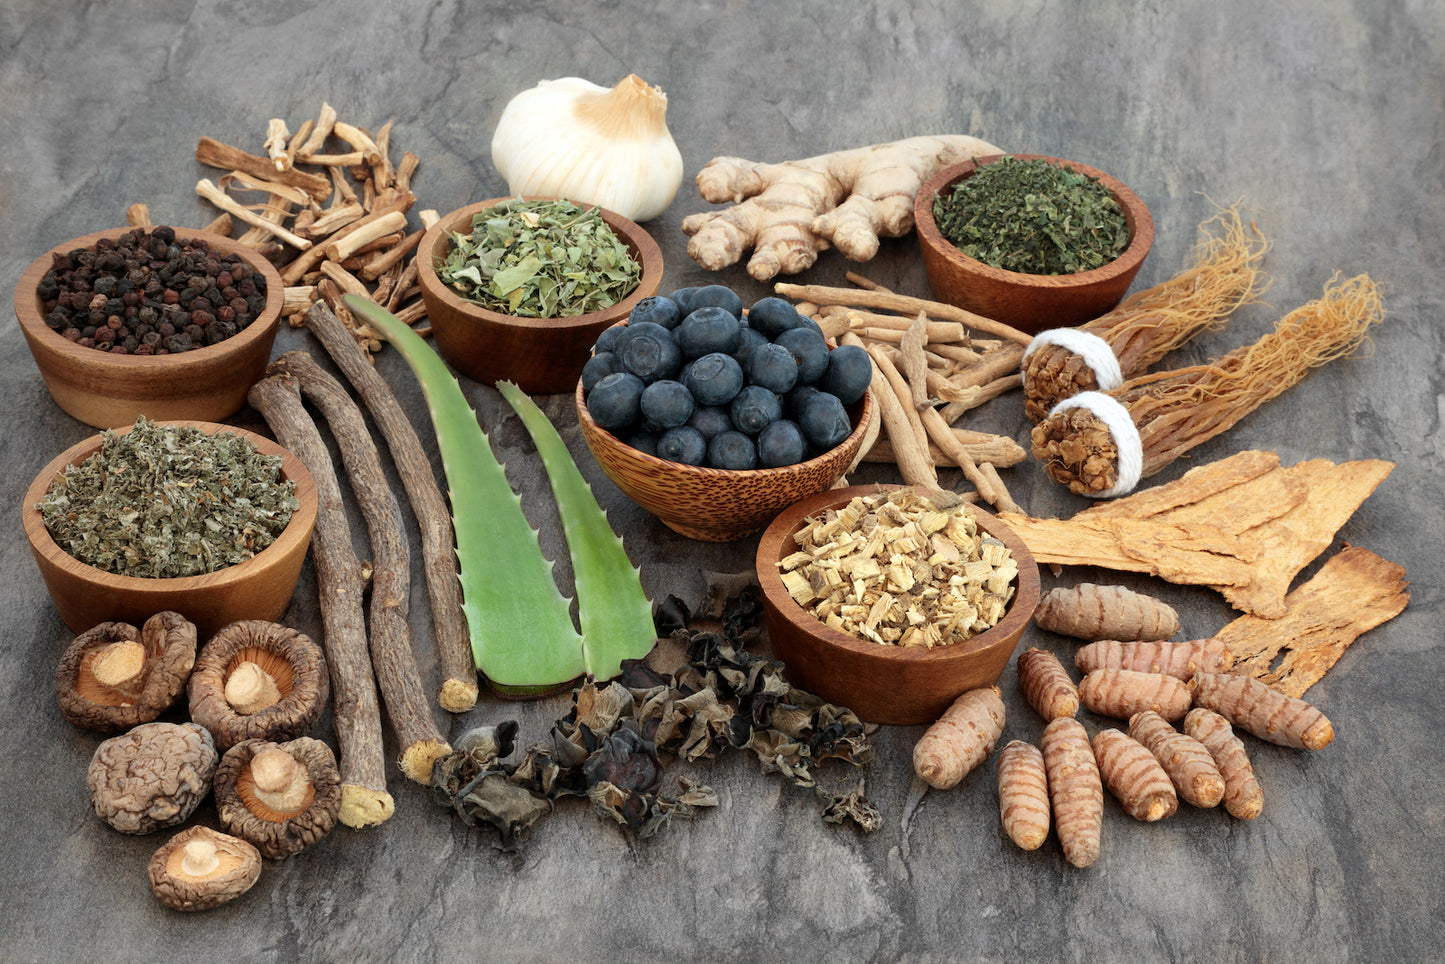 Adaptogens: An Old-World Approach to Cutting-Edge Beauty